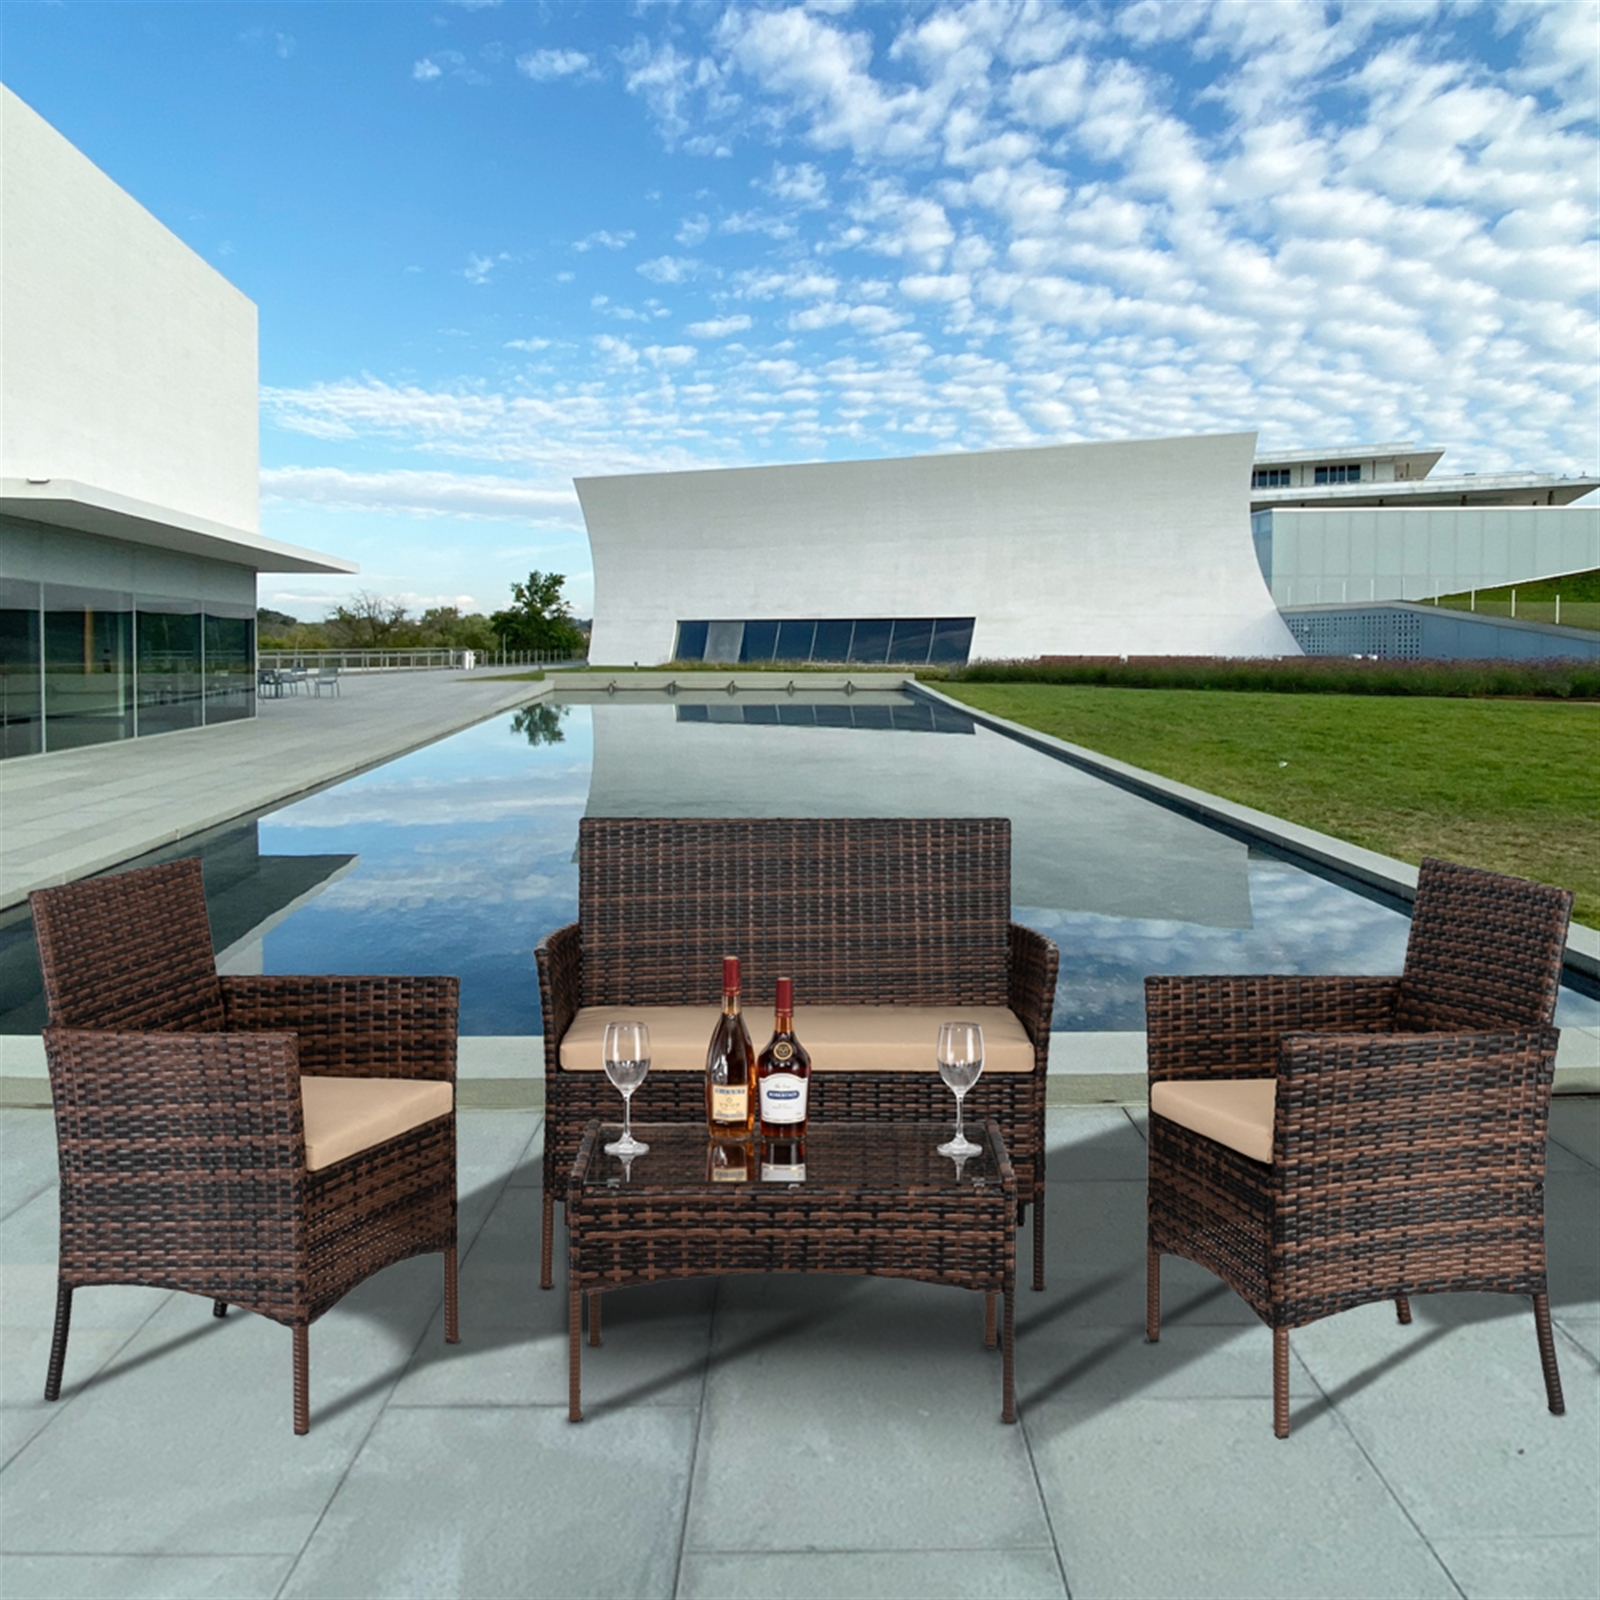 4 Piece Wicker Patio Conversation Furniture Set, Outdoor Rattan Chair and Table Set, Sectional Chair Set with Tea Table & Cushions, Bistro Set for Patio Backyard Porch Garden Poolside Balcony, B4512 - image 1 of 9